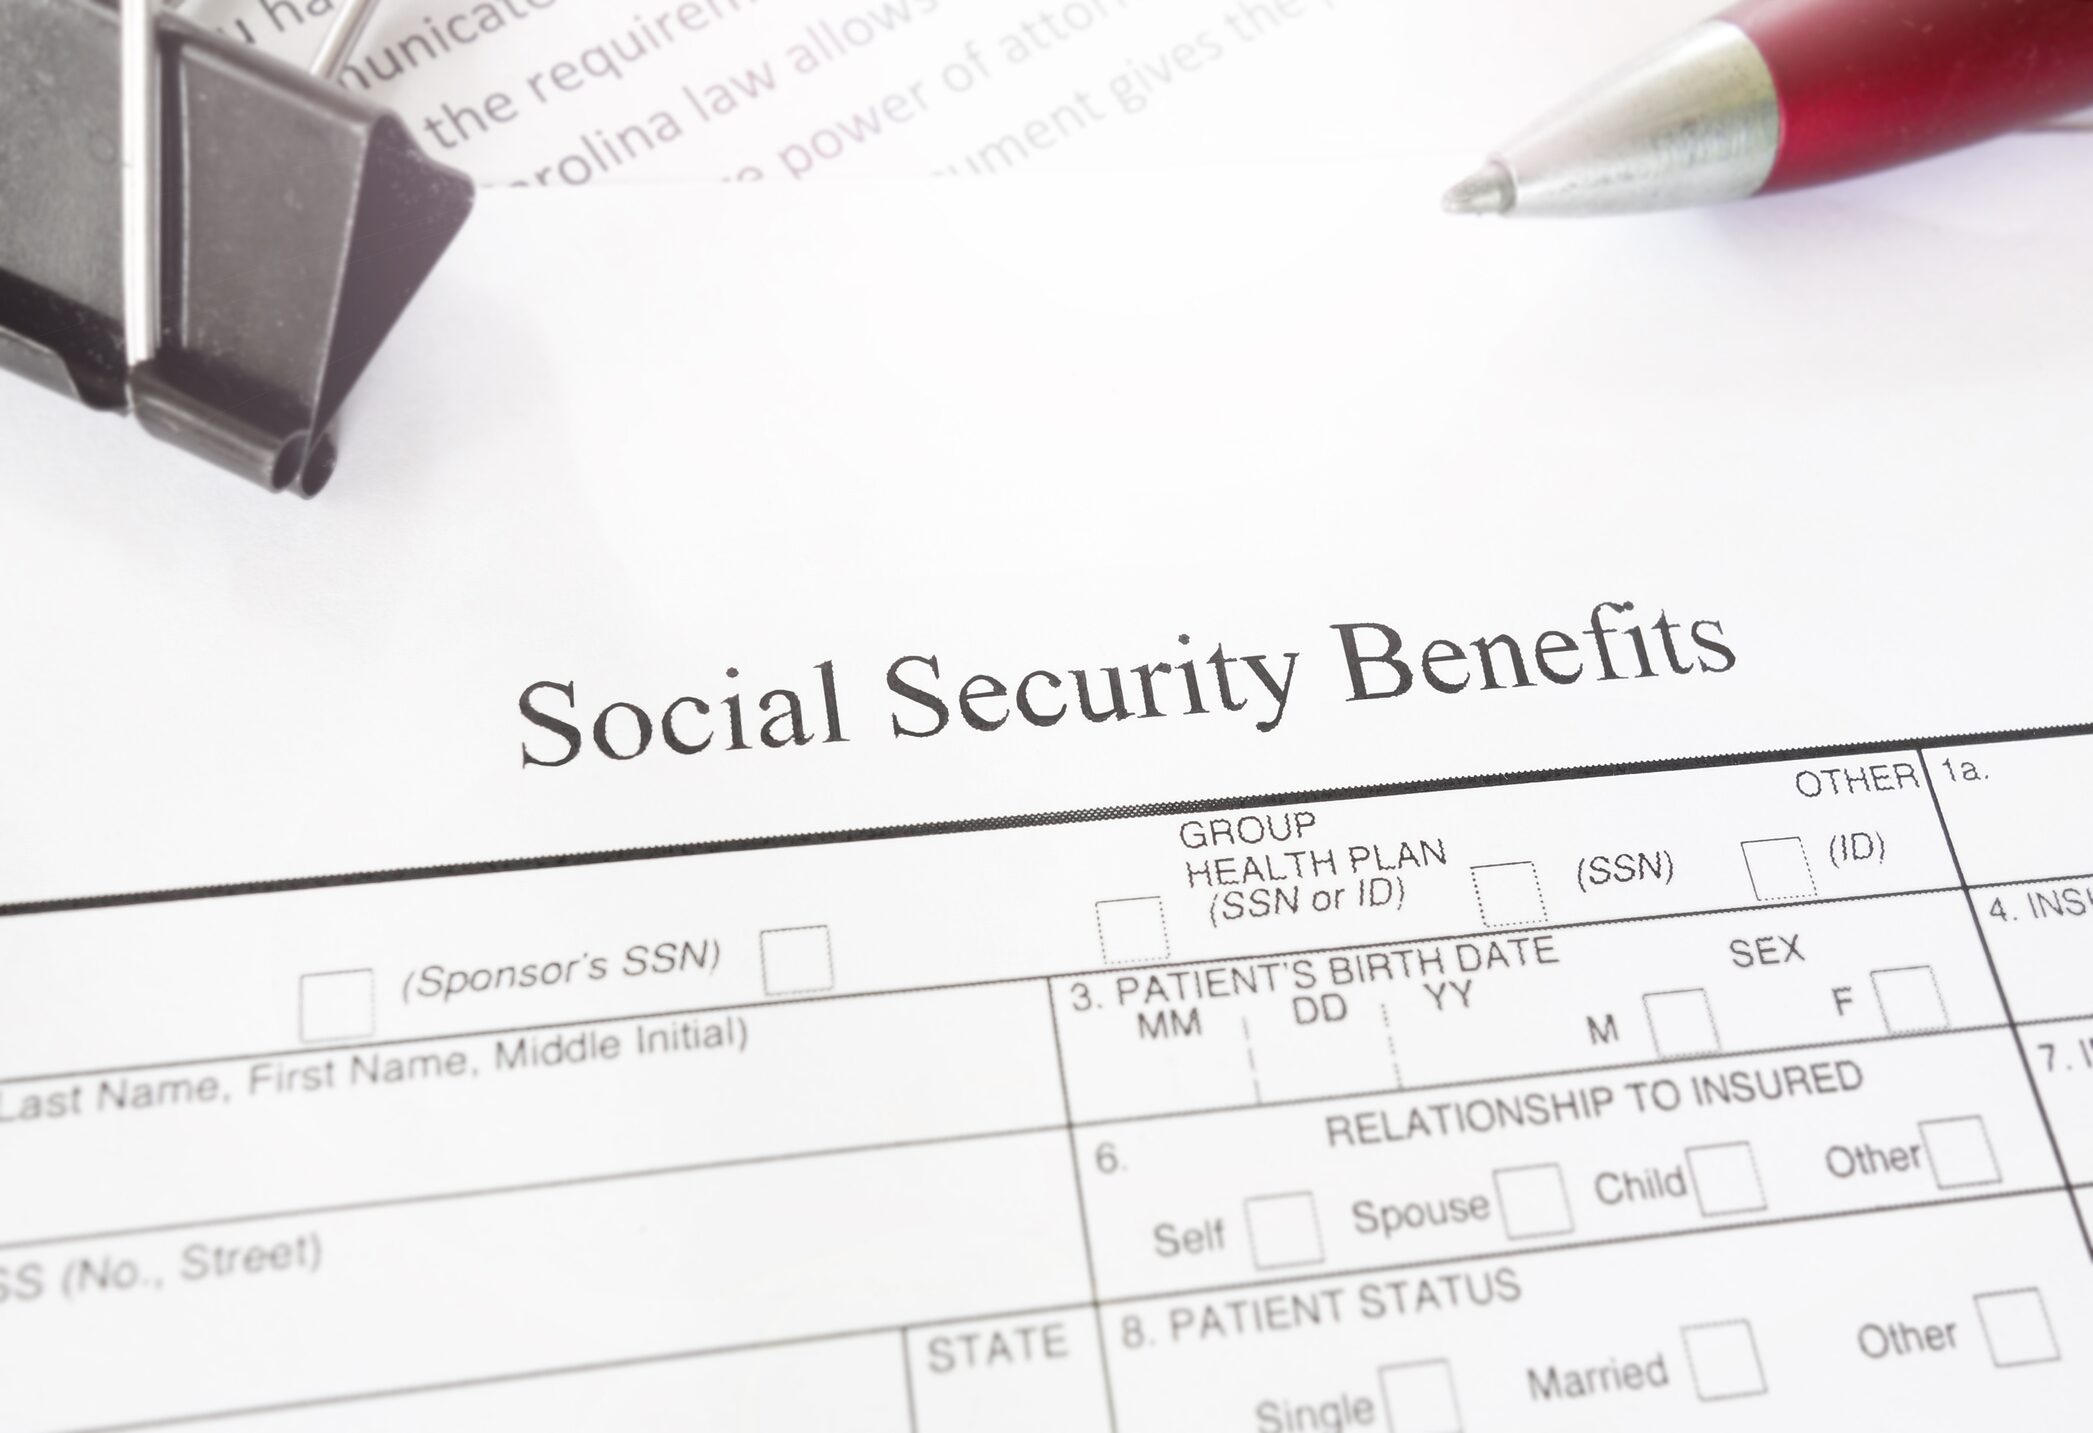 Social Security Administration administers social security retirement benefits